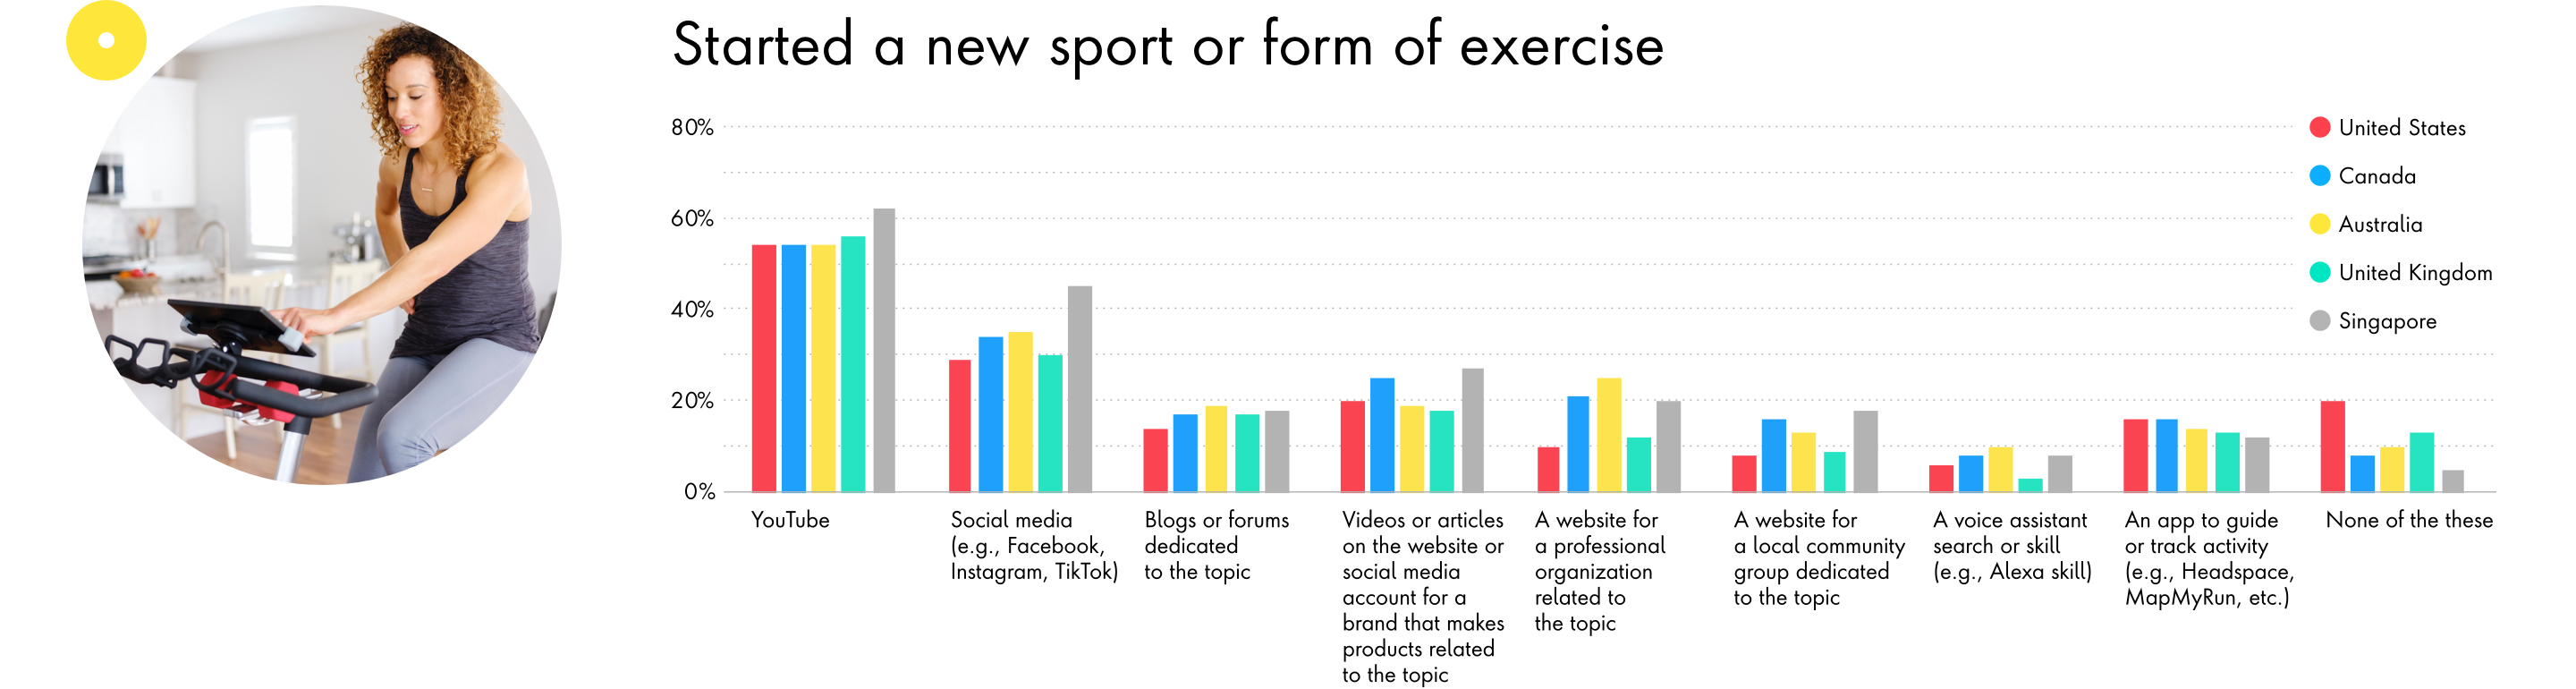 Chart: Started a new sport or form of exercise